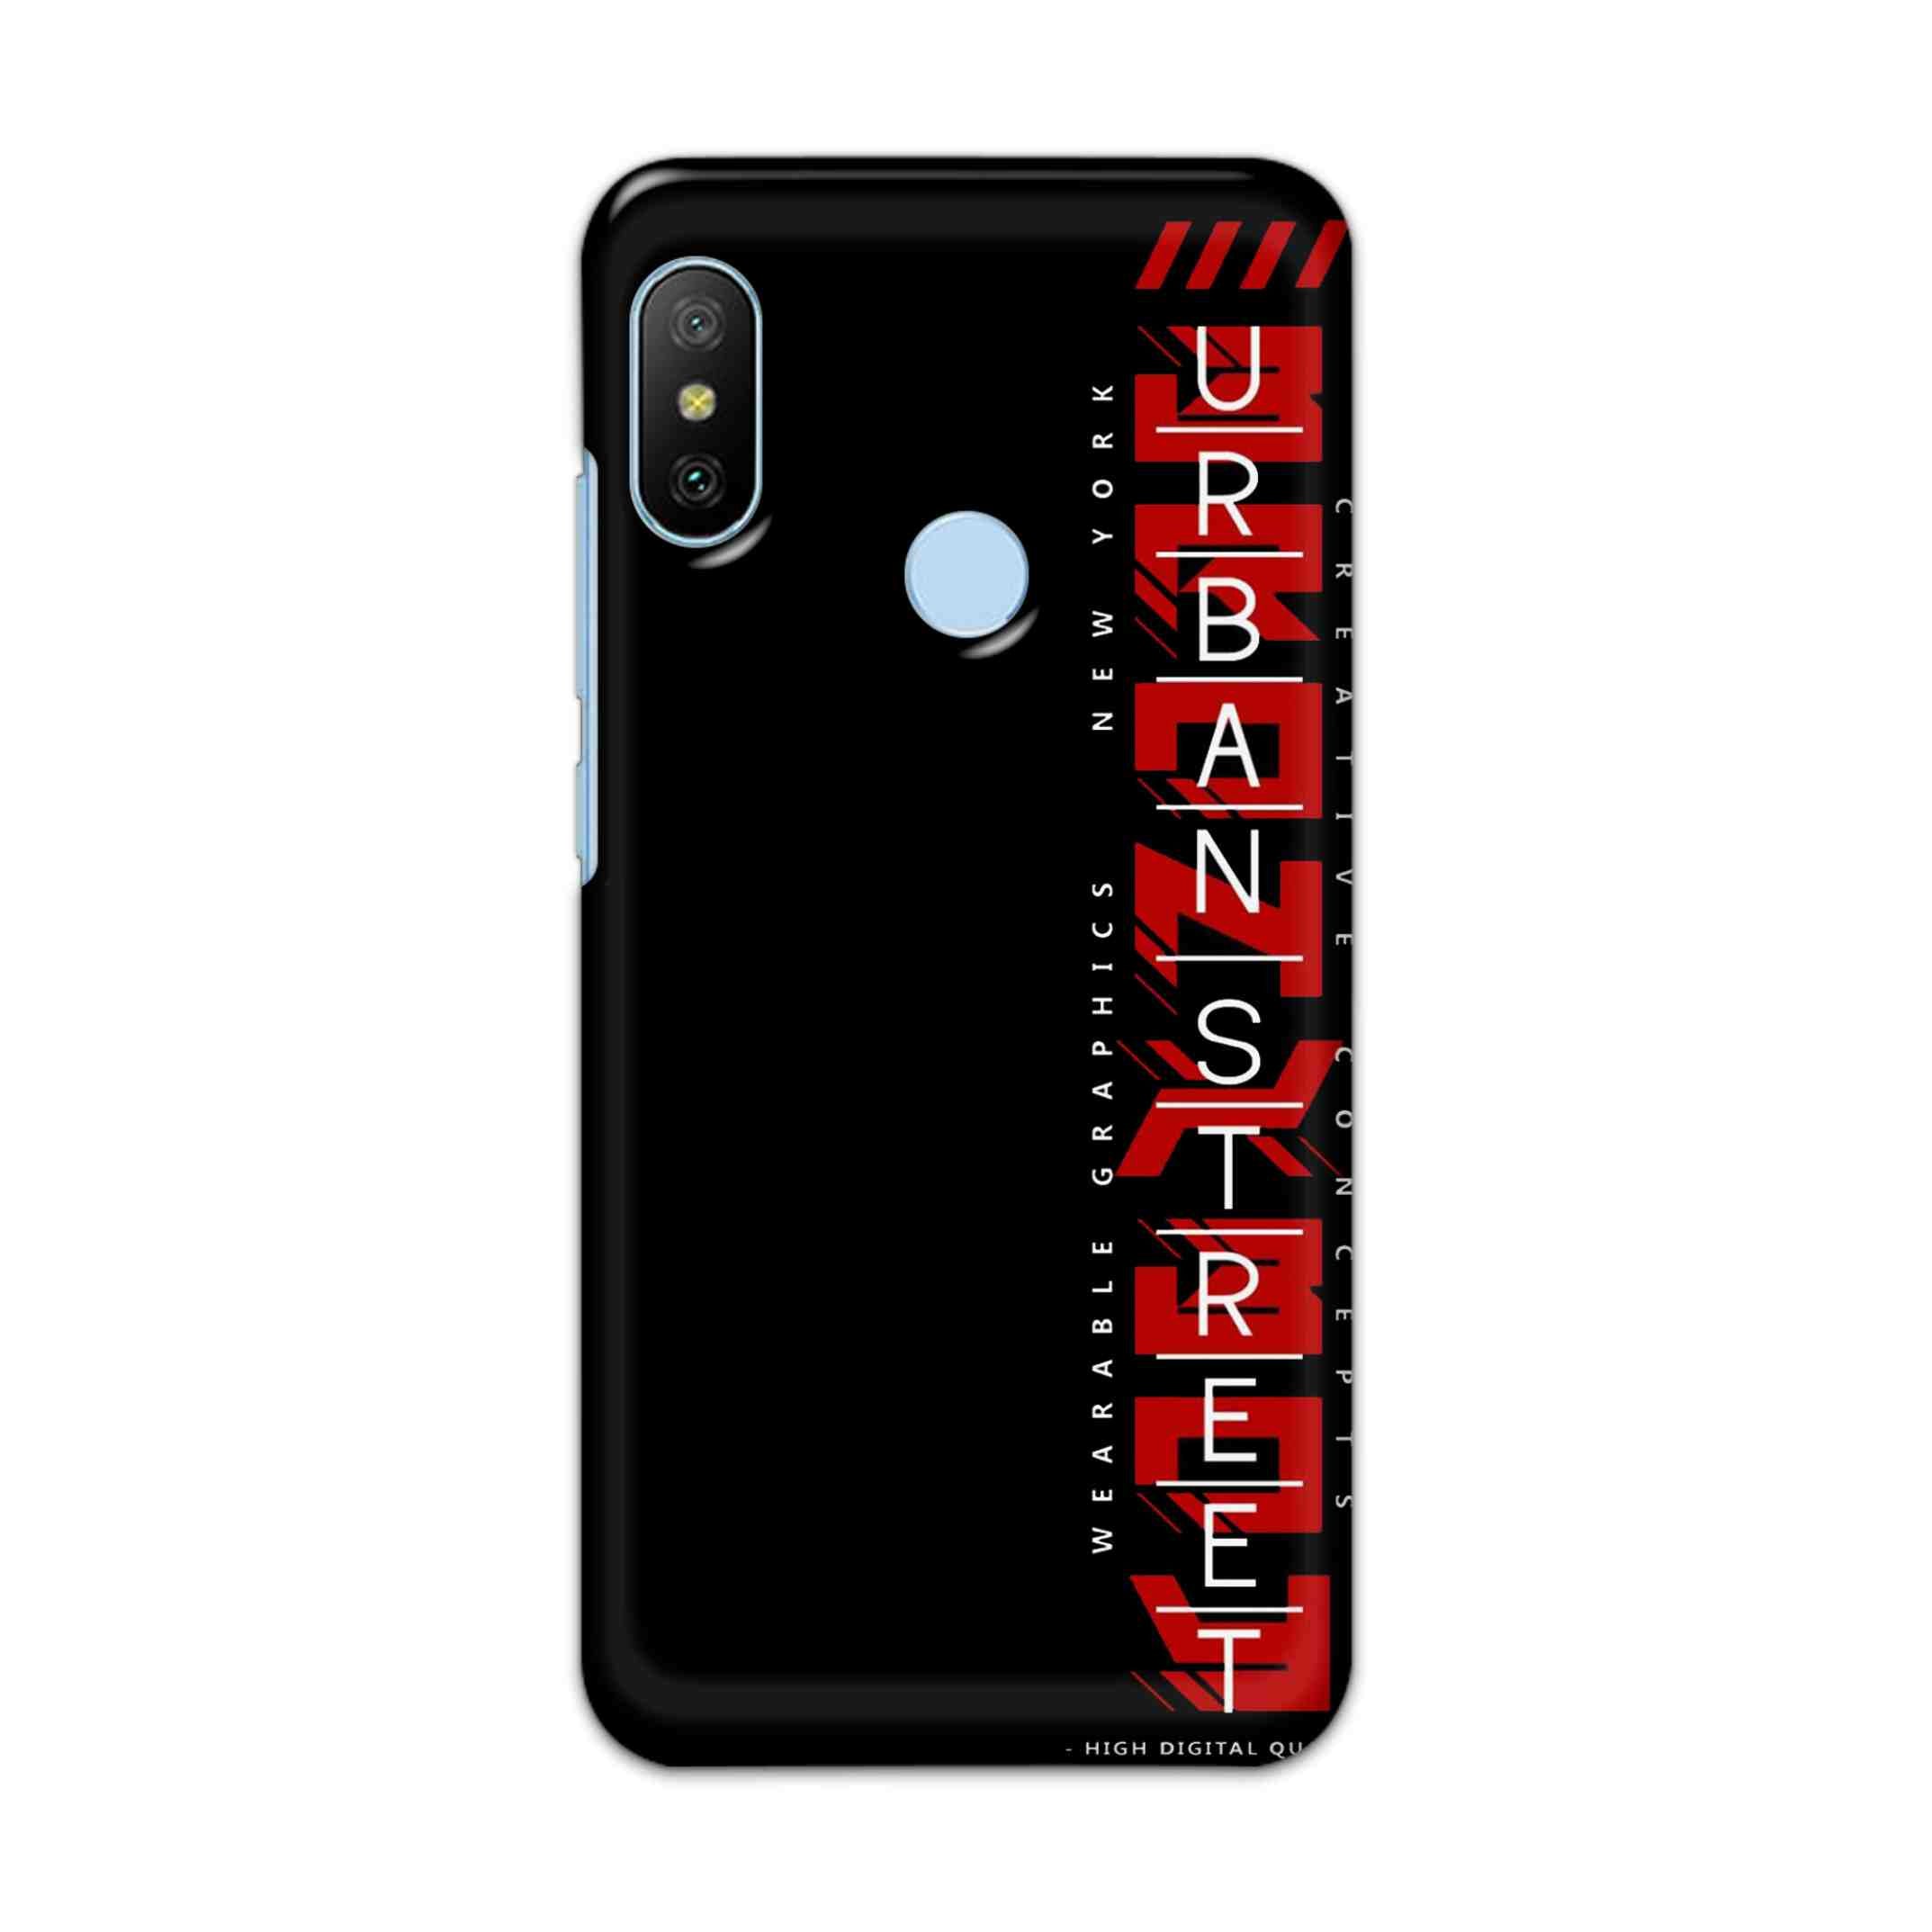 Buy Urban Street Hard Back Mobile Phone Case/Cover For Xiaomi Redmi 6 Pro Online